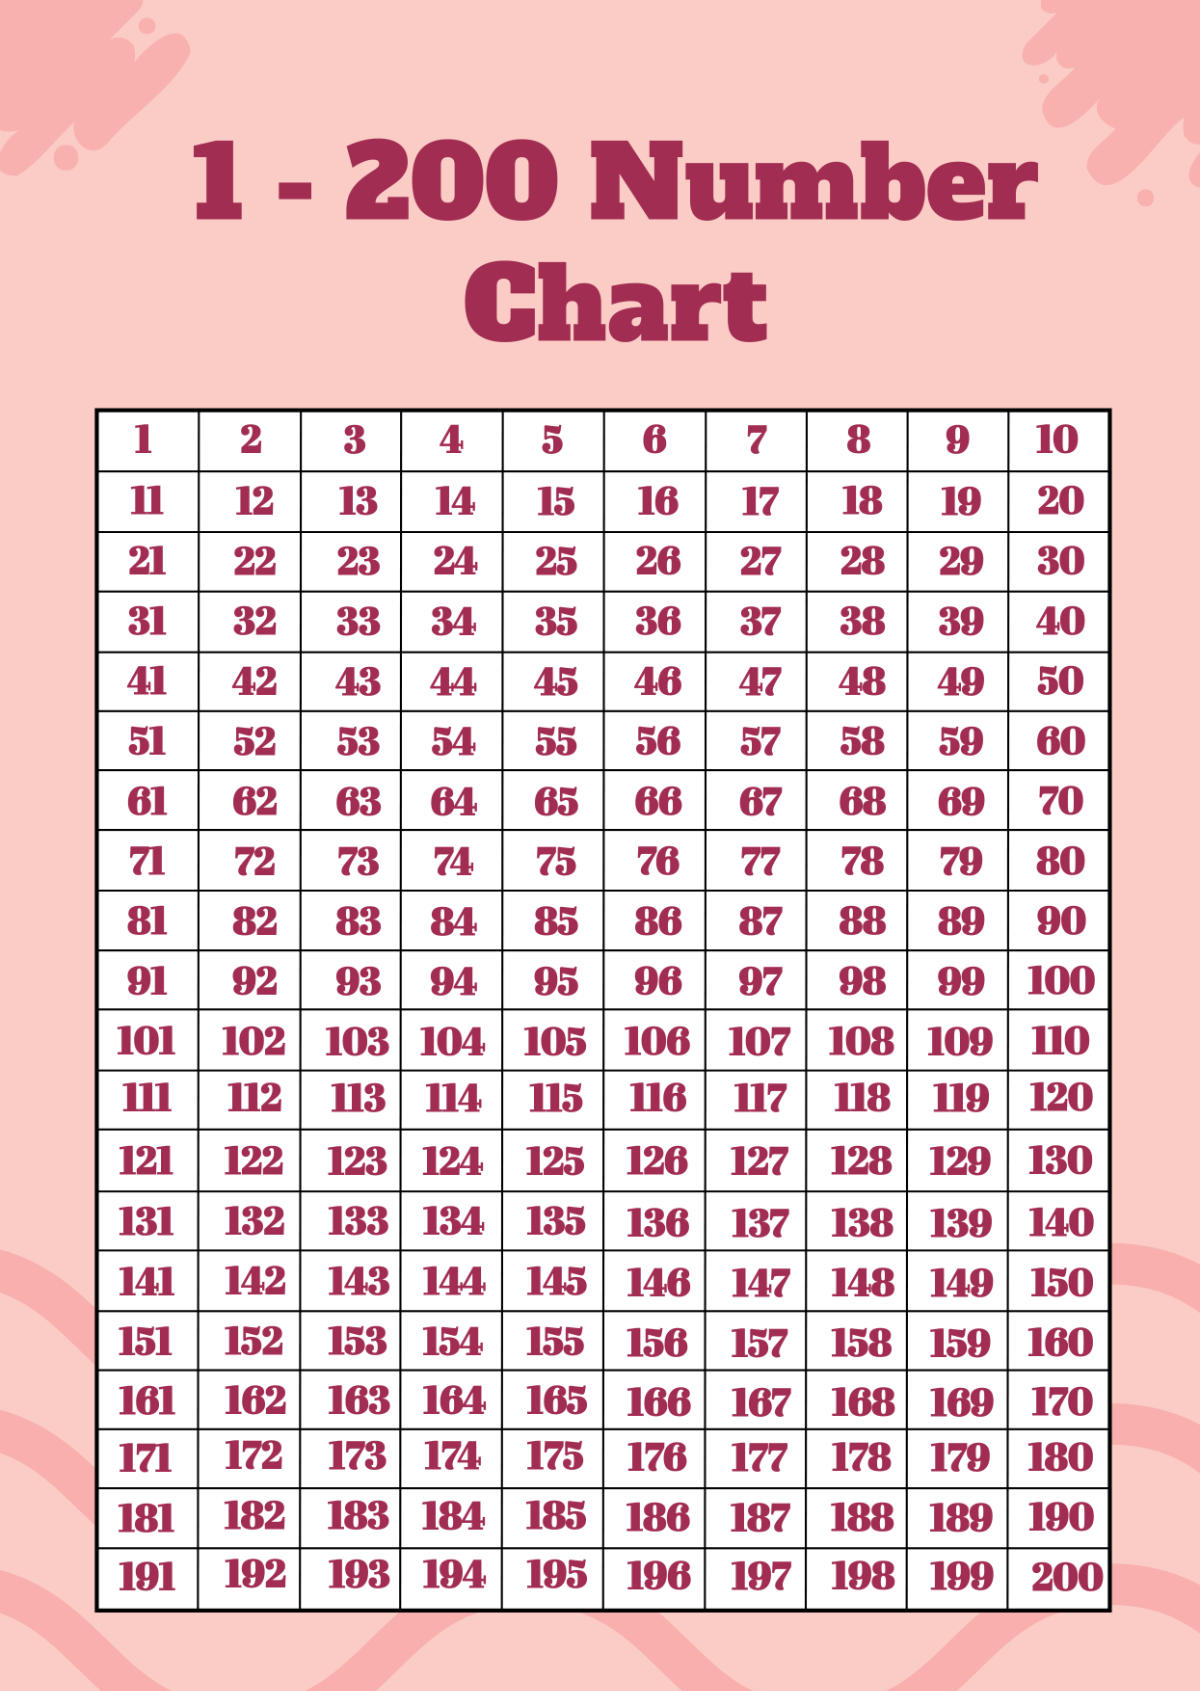 1 - 200 Number Chart